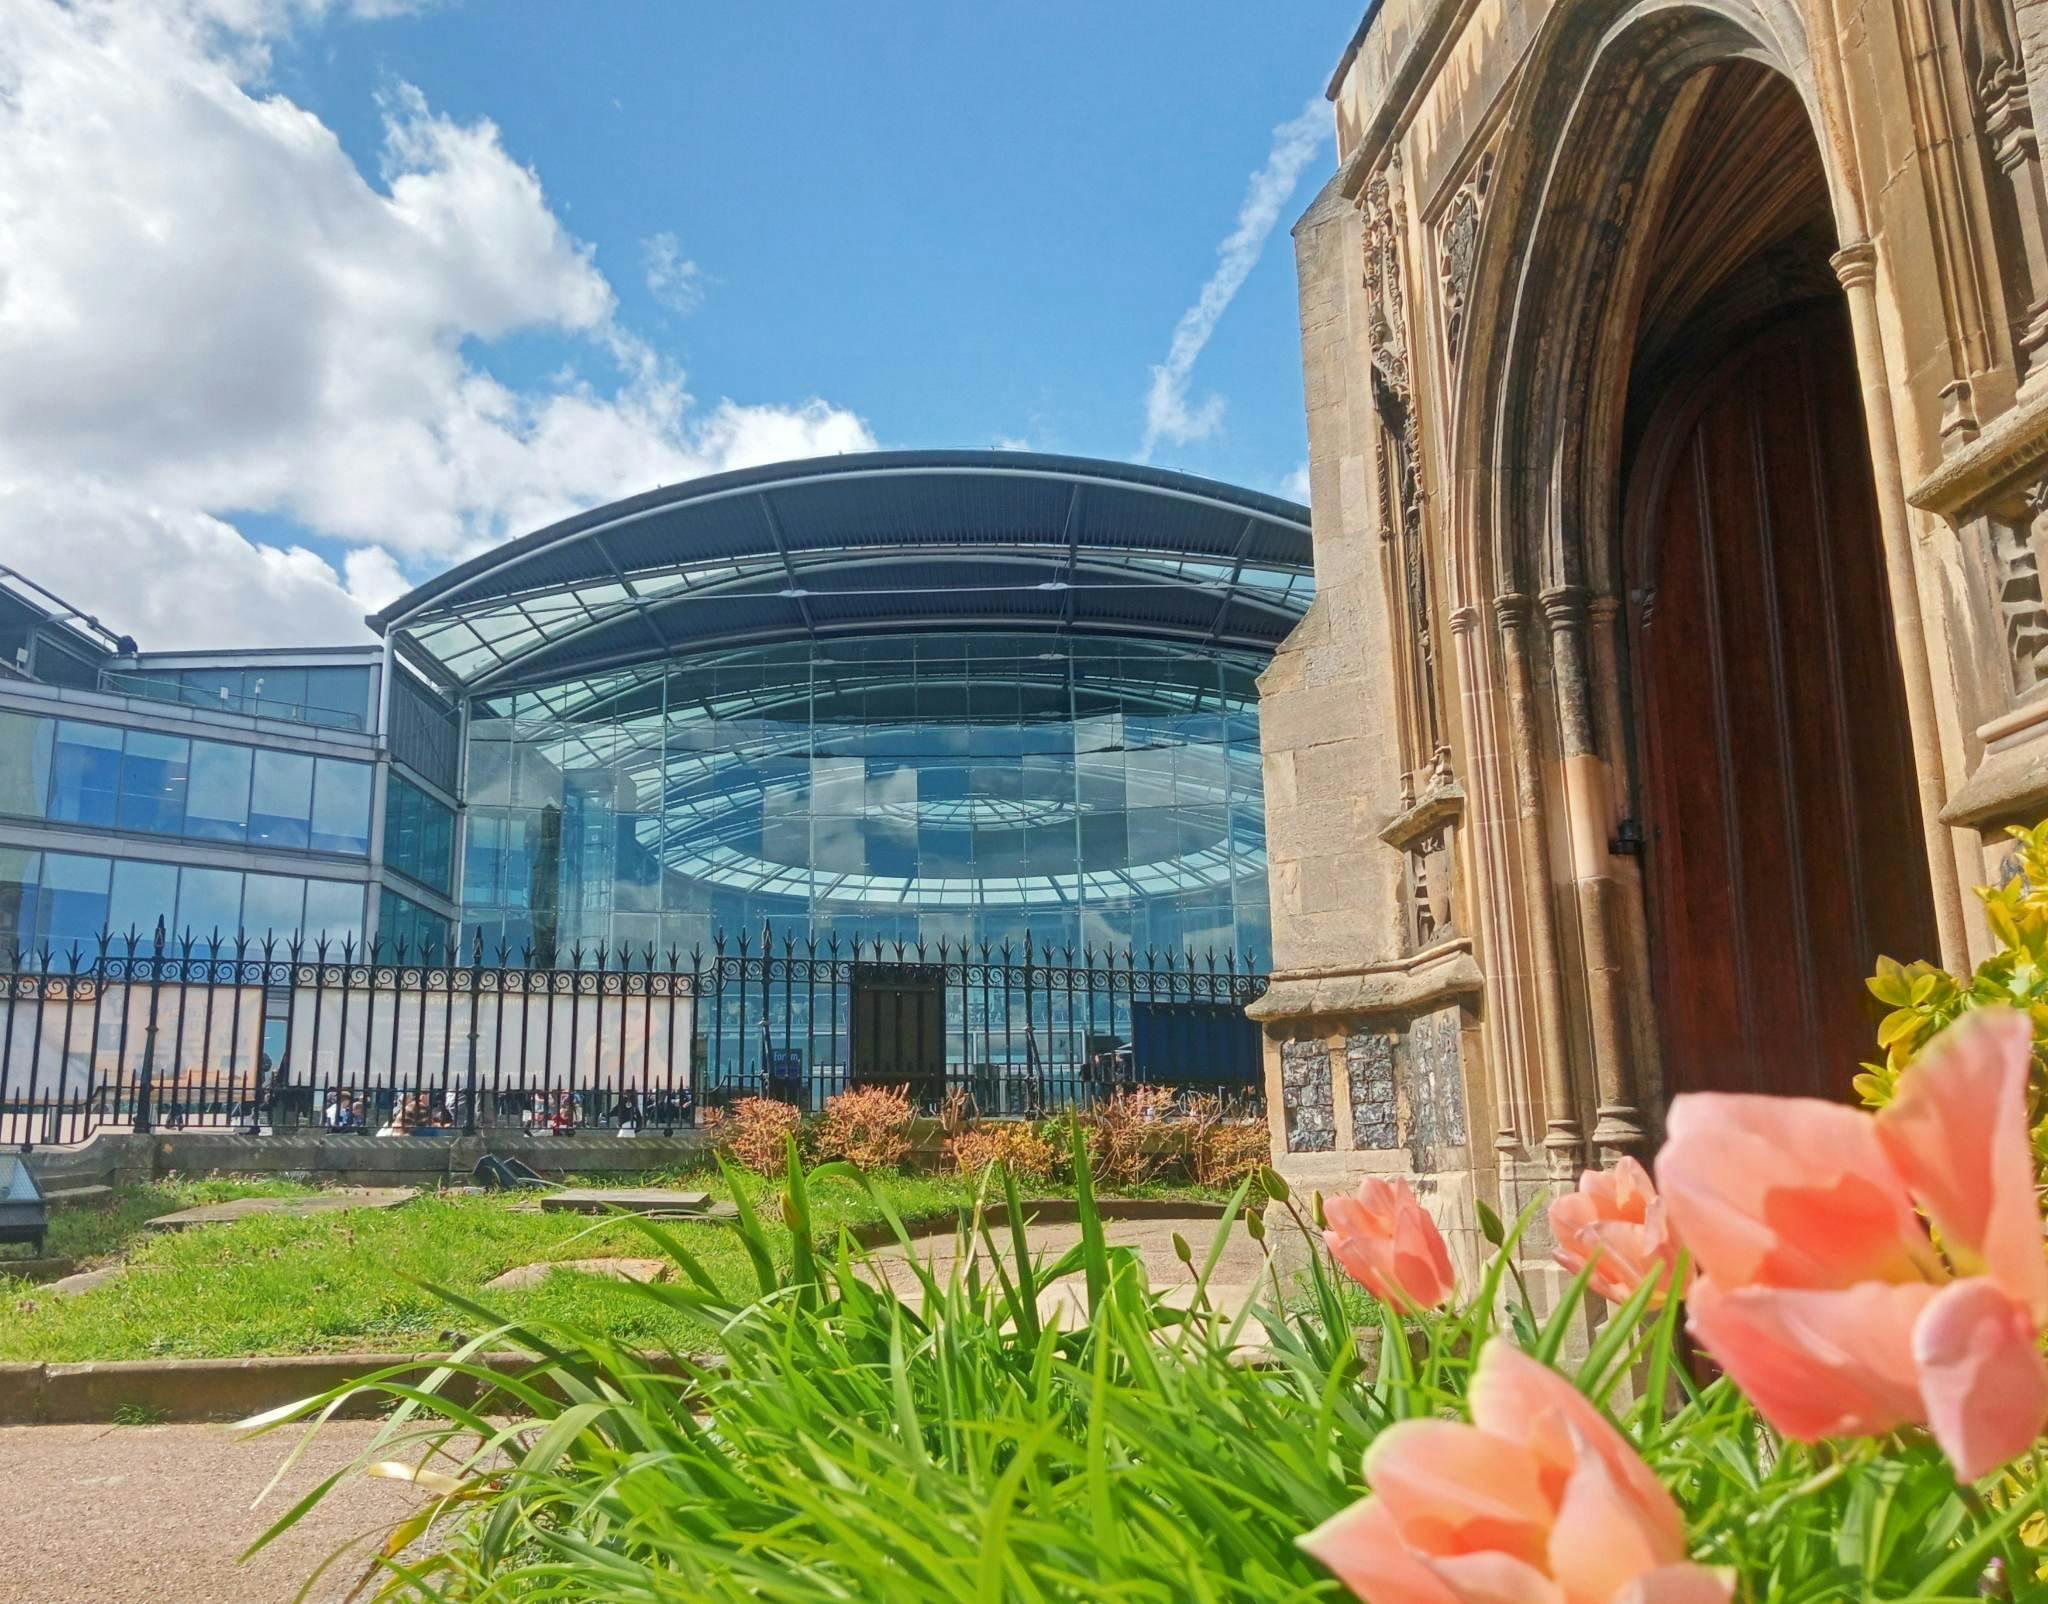 Image of The Forum, with pink tulips in the foreground